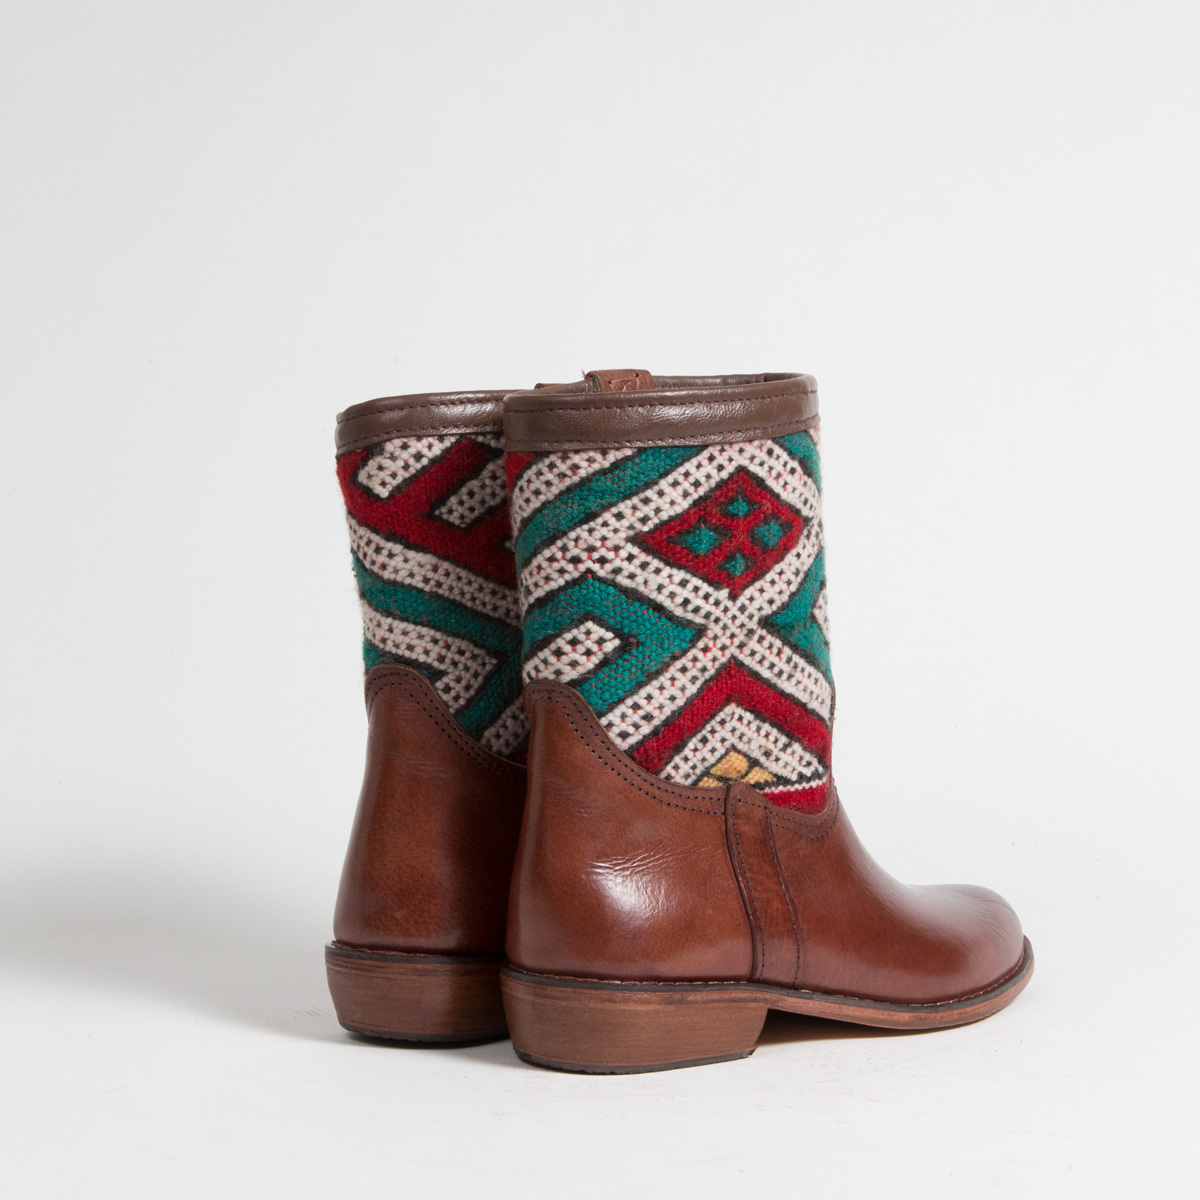 Bottines Kilim cuir mababouche artisanales (Réf. CB1-37)